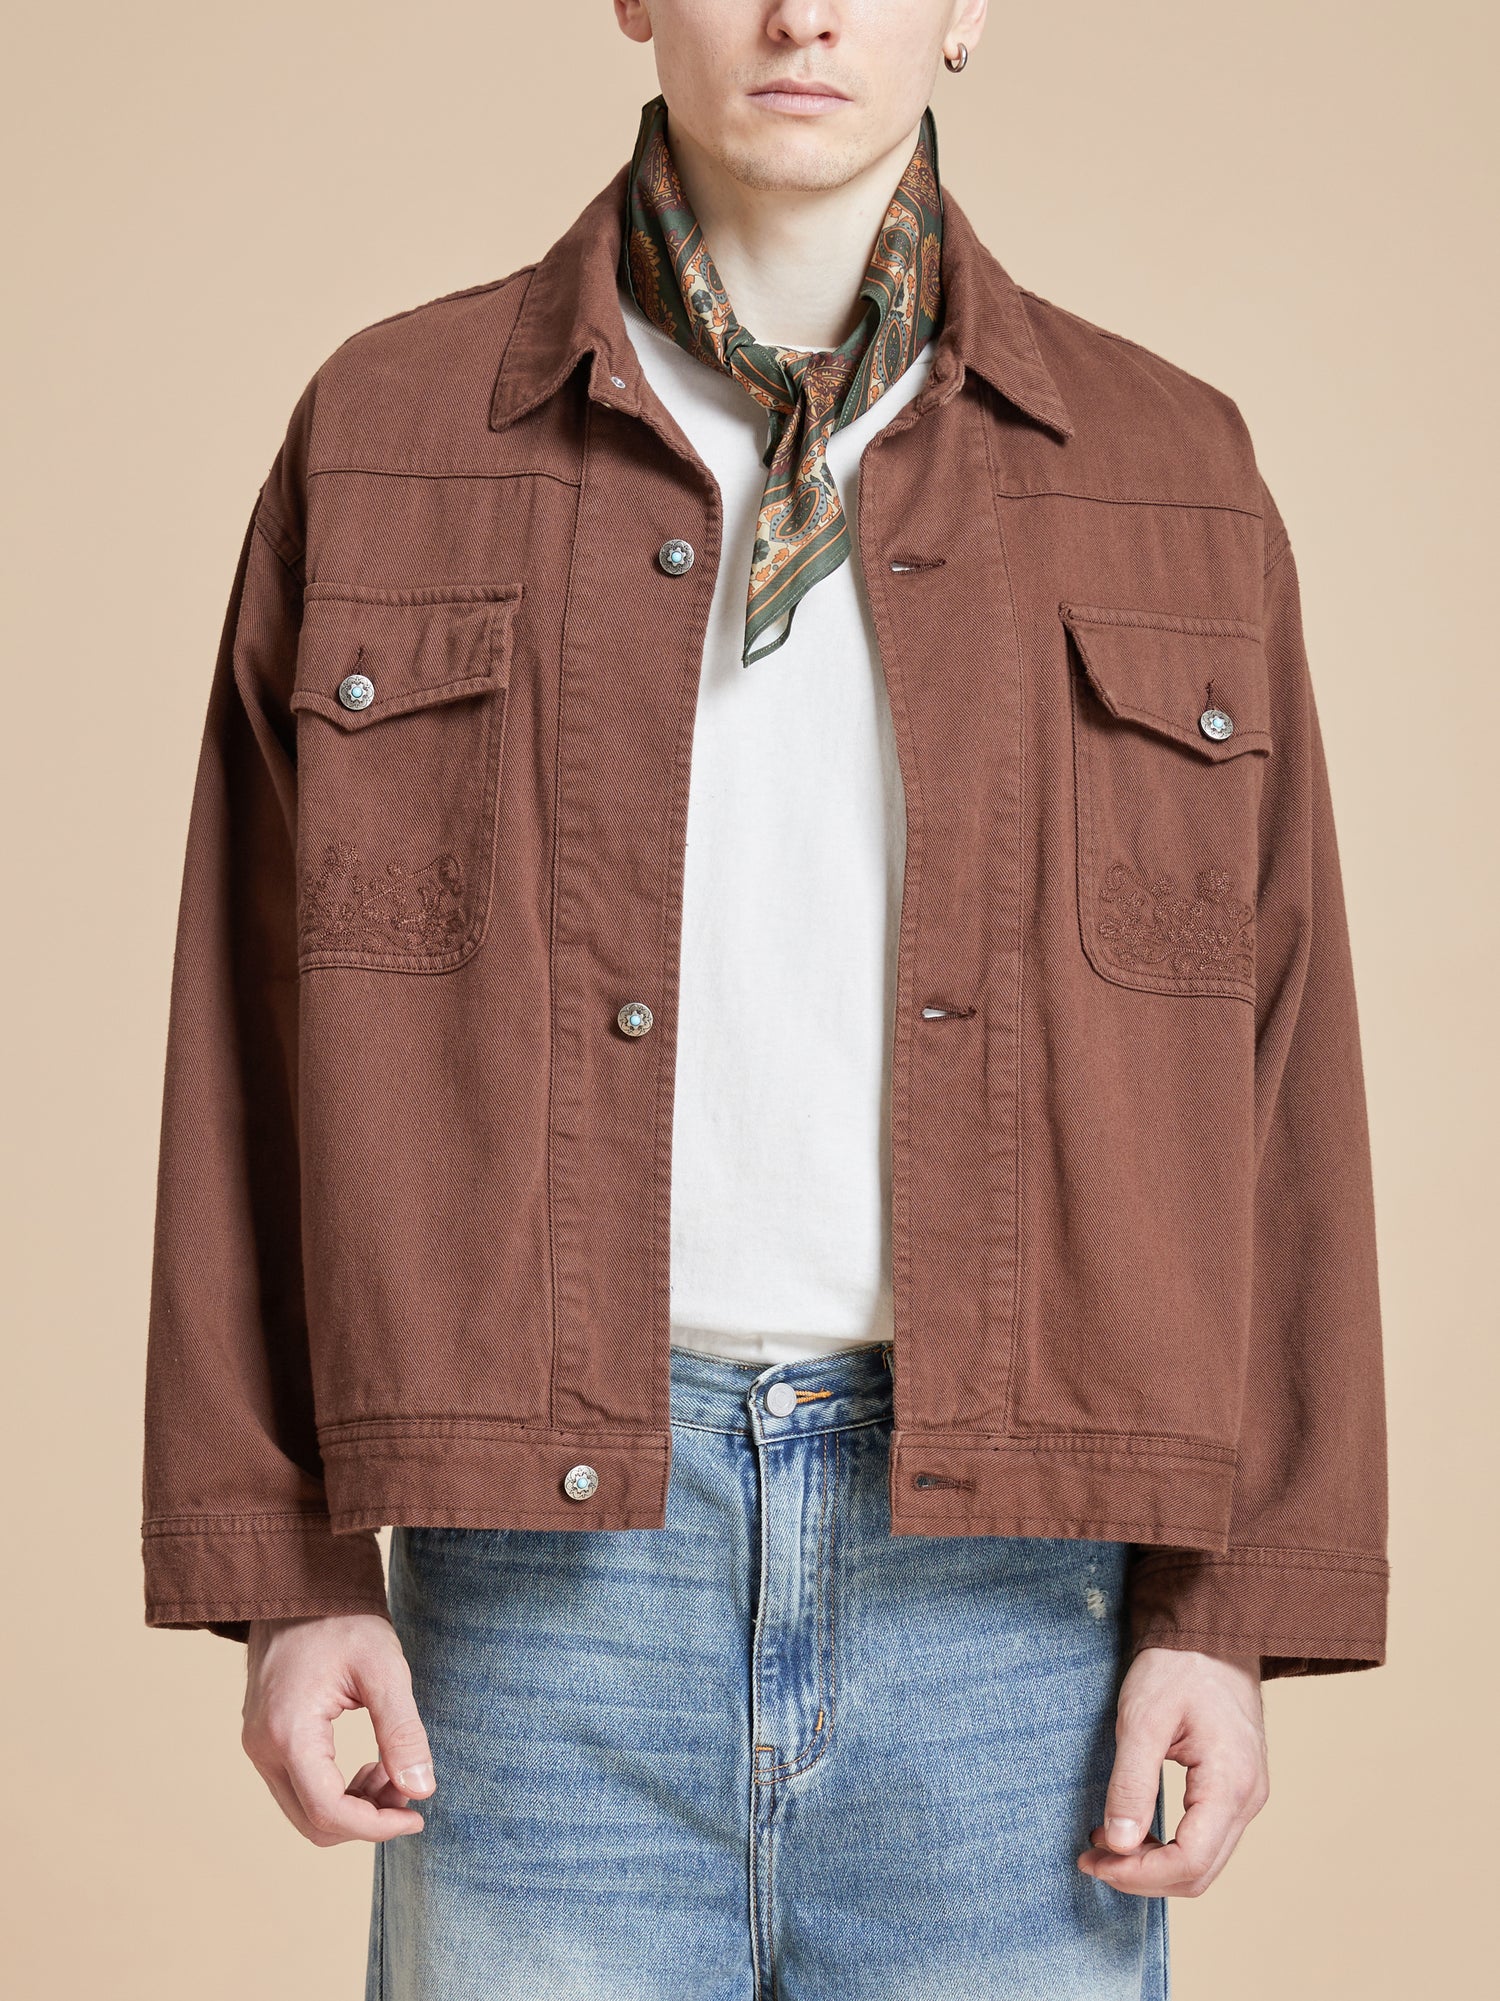 A man wearing a brown jacket and jeans featuring Found Paisley Forest Bandana.